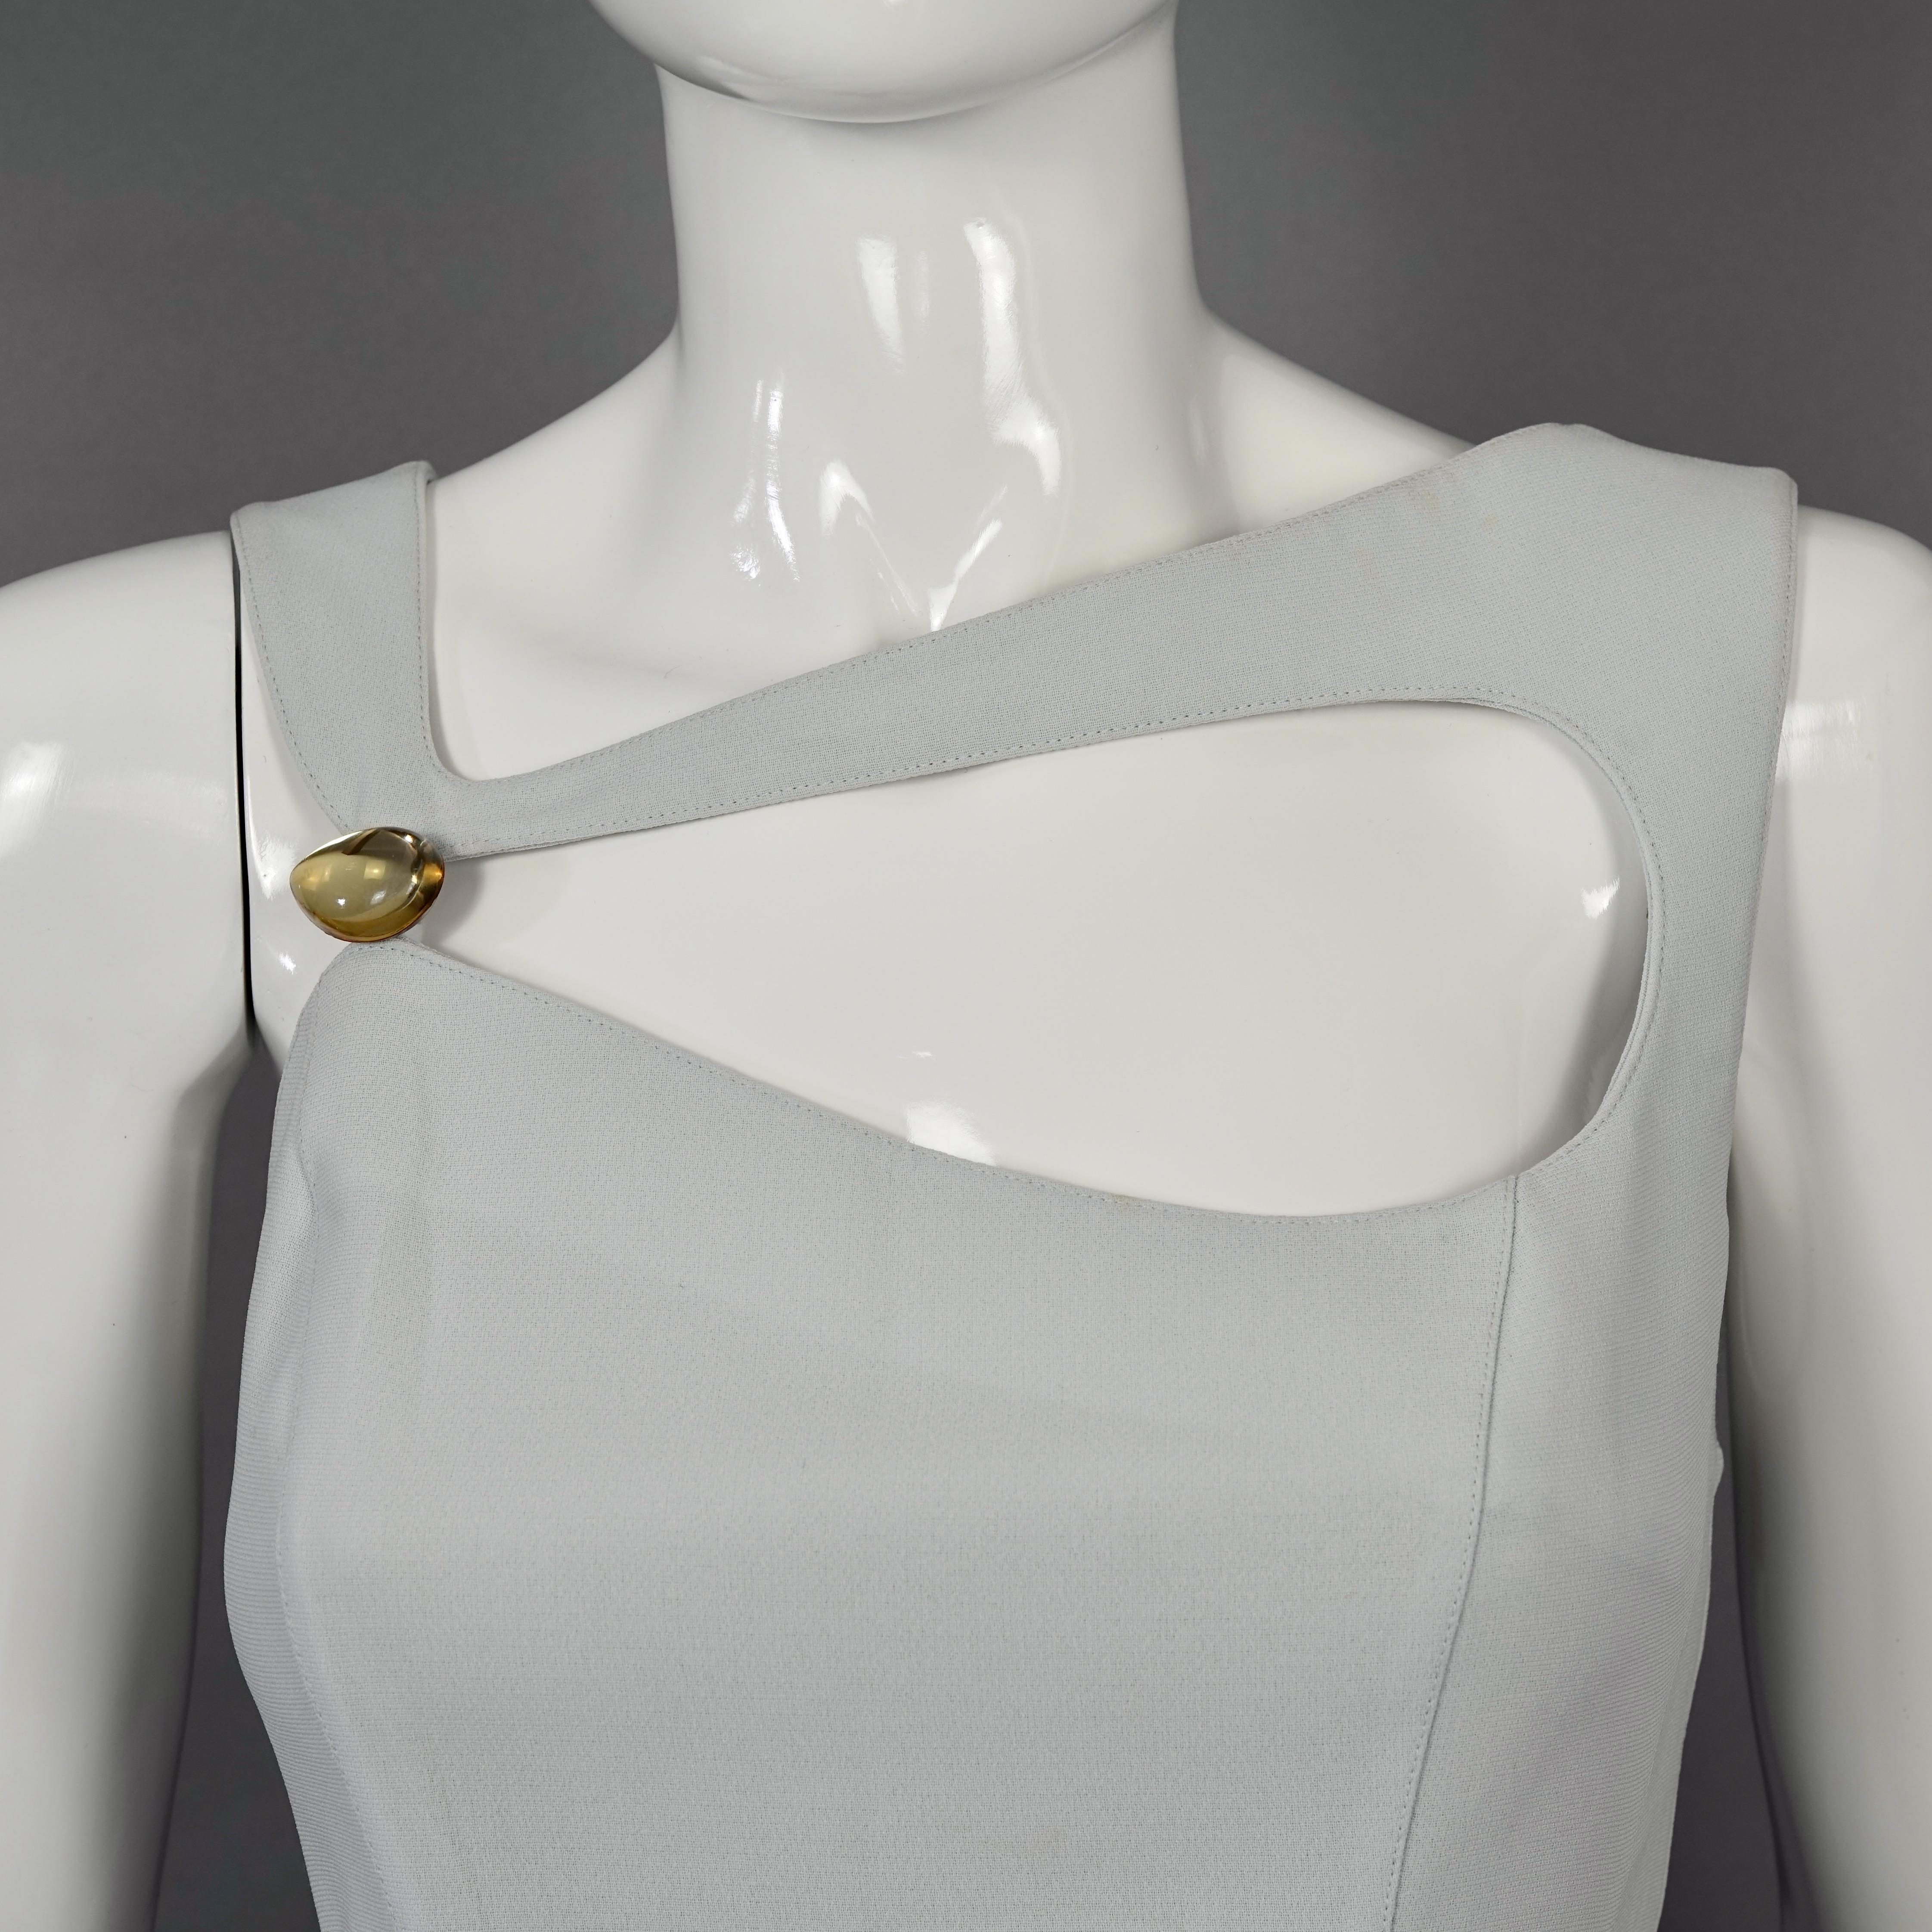 Vintage THIERRY MUGLER Jeweled Cut Out Neckline Dress

Measurements taken laid flat, please double bust, waist and hips:
Shoulder: 15.35 inches (39 cm)
Bust: 16.53 inches (42 cm)
Waist: 15.74 inches (40cm)
Hips: 18.89 inches (48 cm)
Length: 44.88